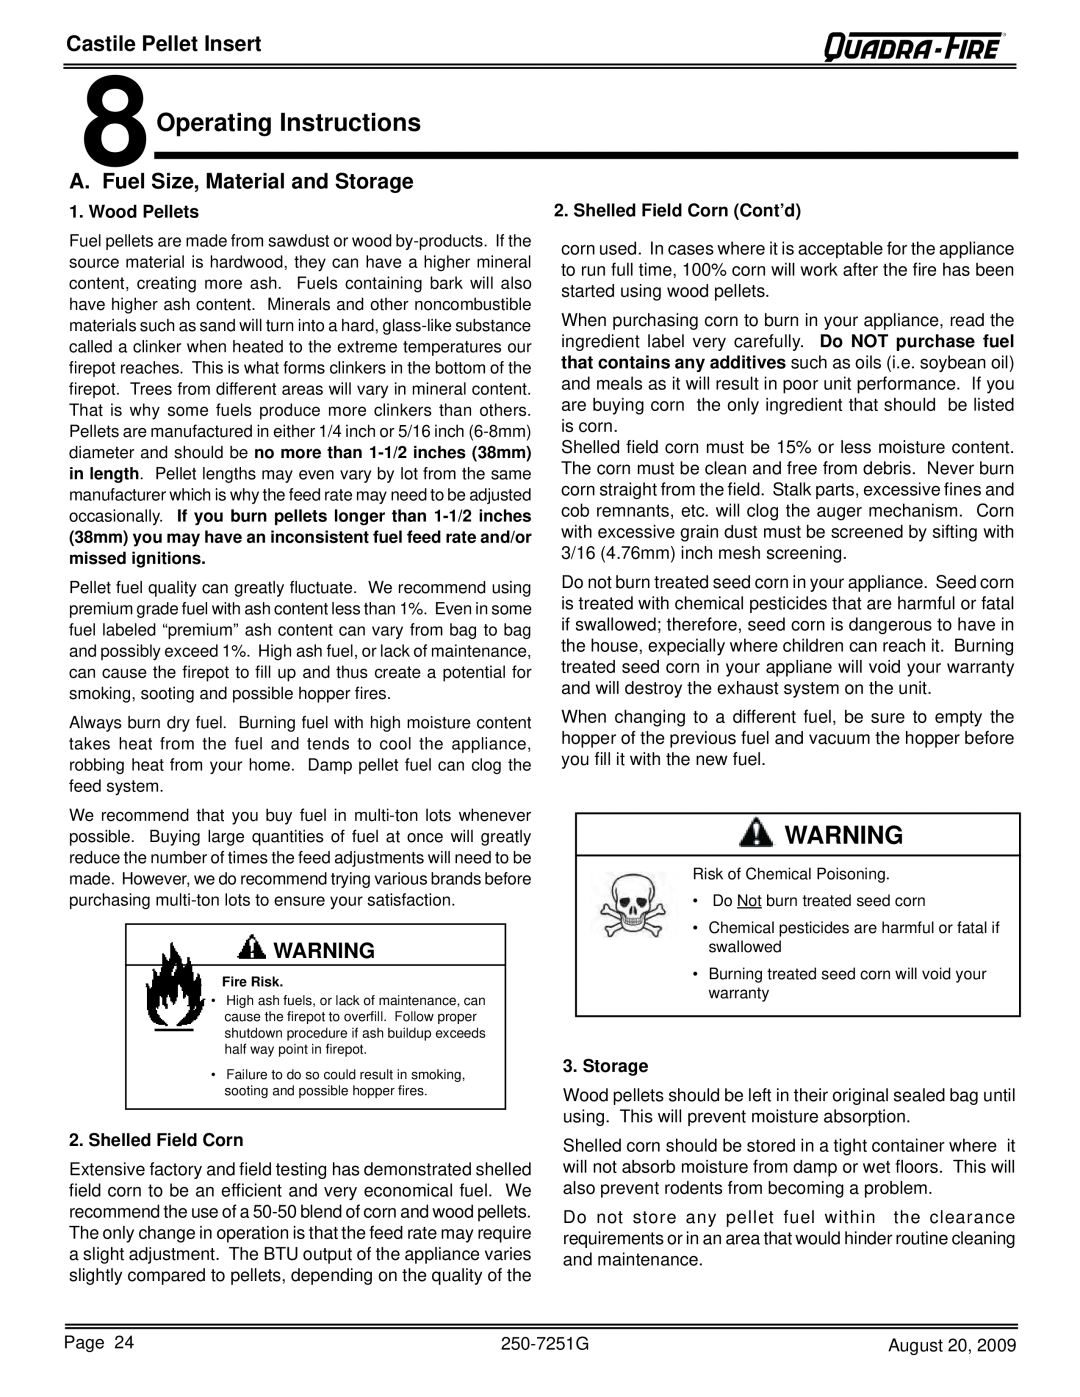 Quadra-Fire 810-03201 8Operating Instructions, A. Fuel Size, Material and Storage, Wood Pellets, Shelled Field Corn Cont’d 